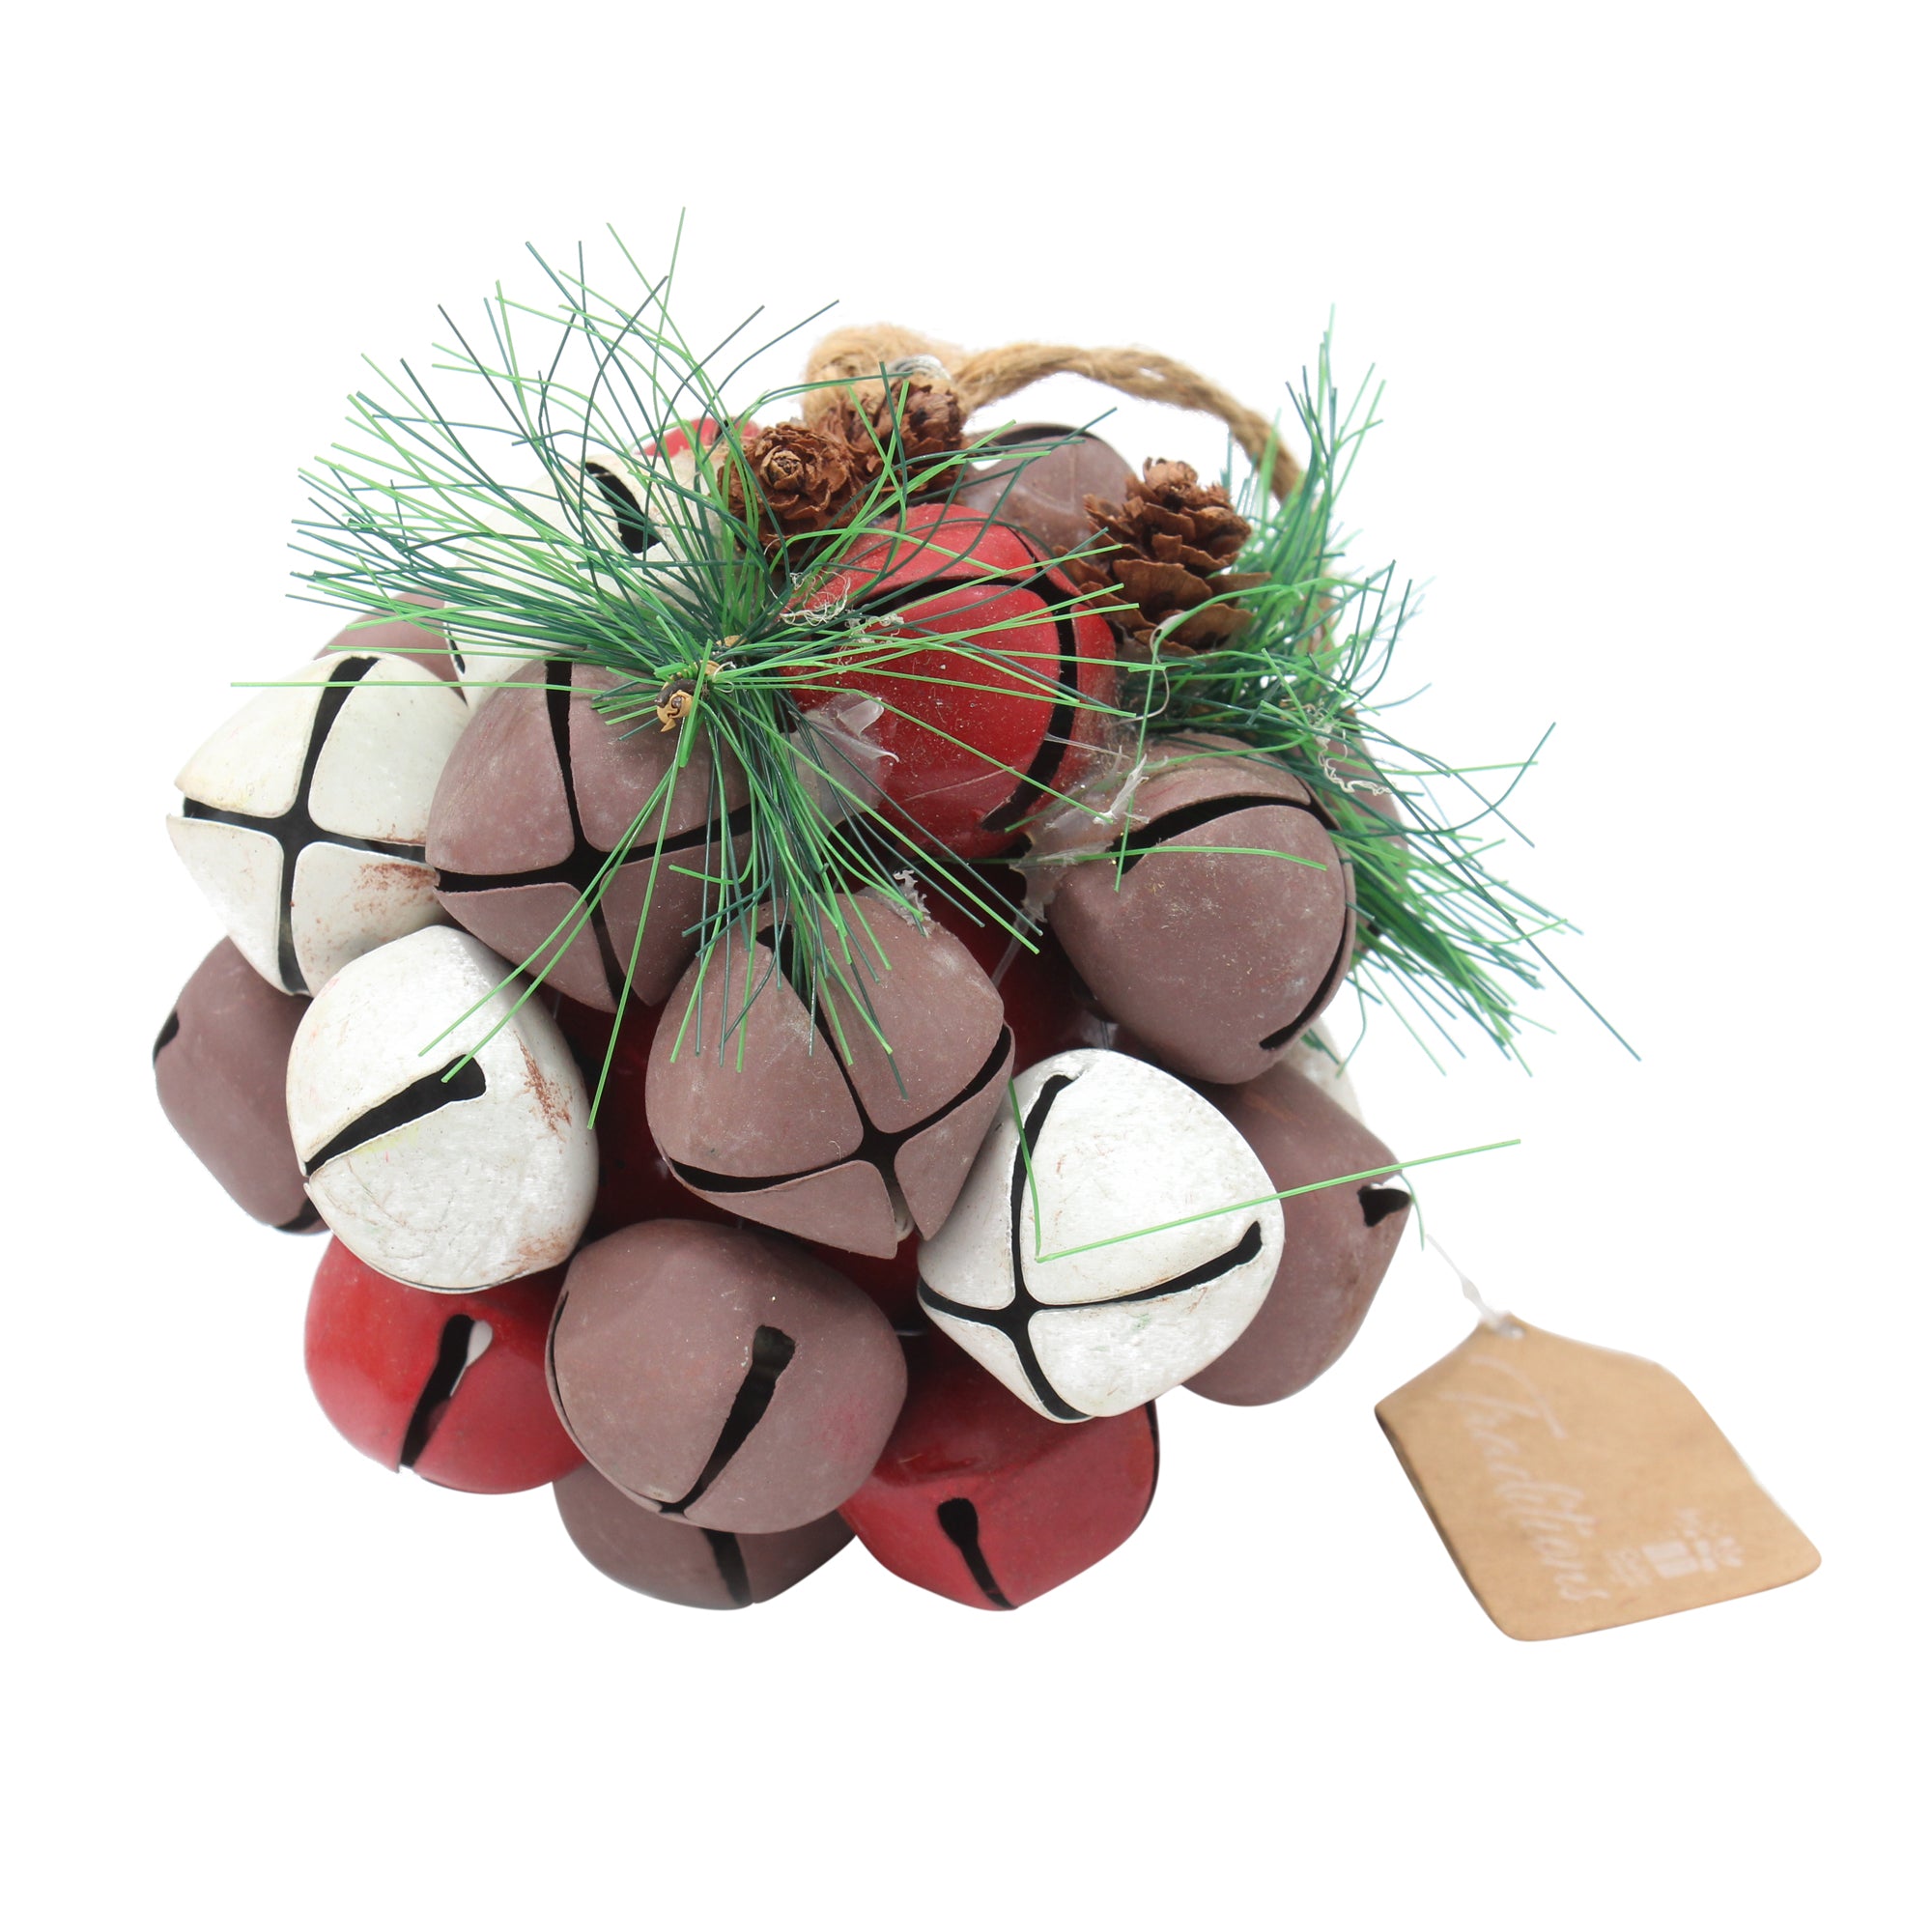 Nutbell Decorative Hanging Ball Bunch.